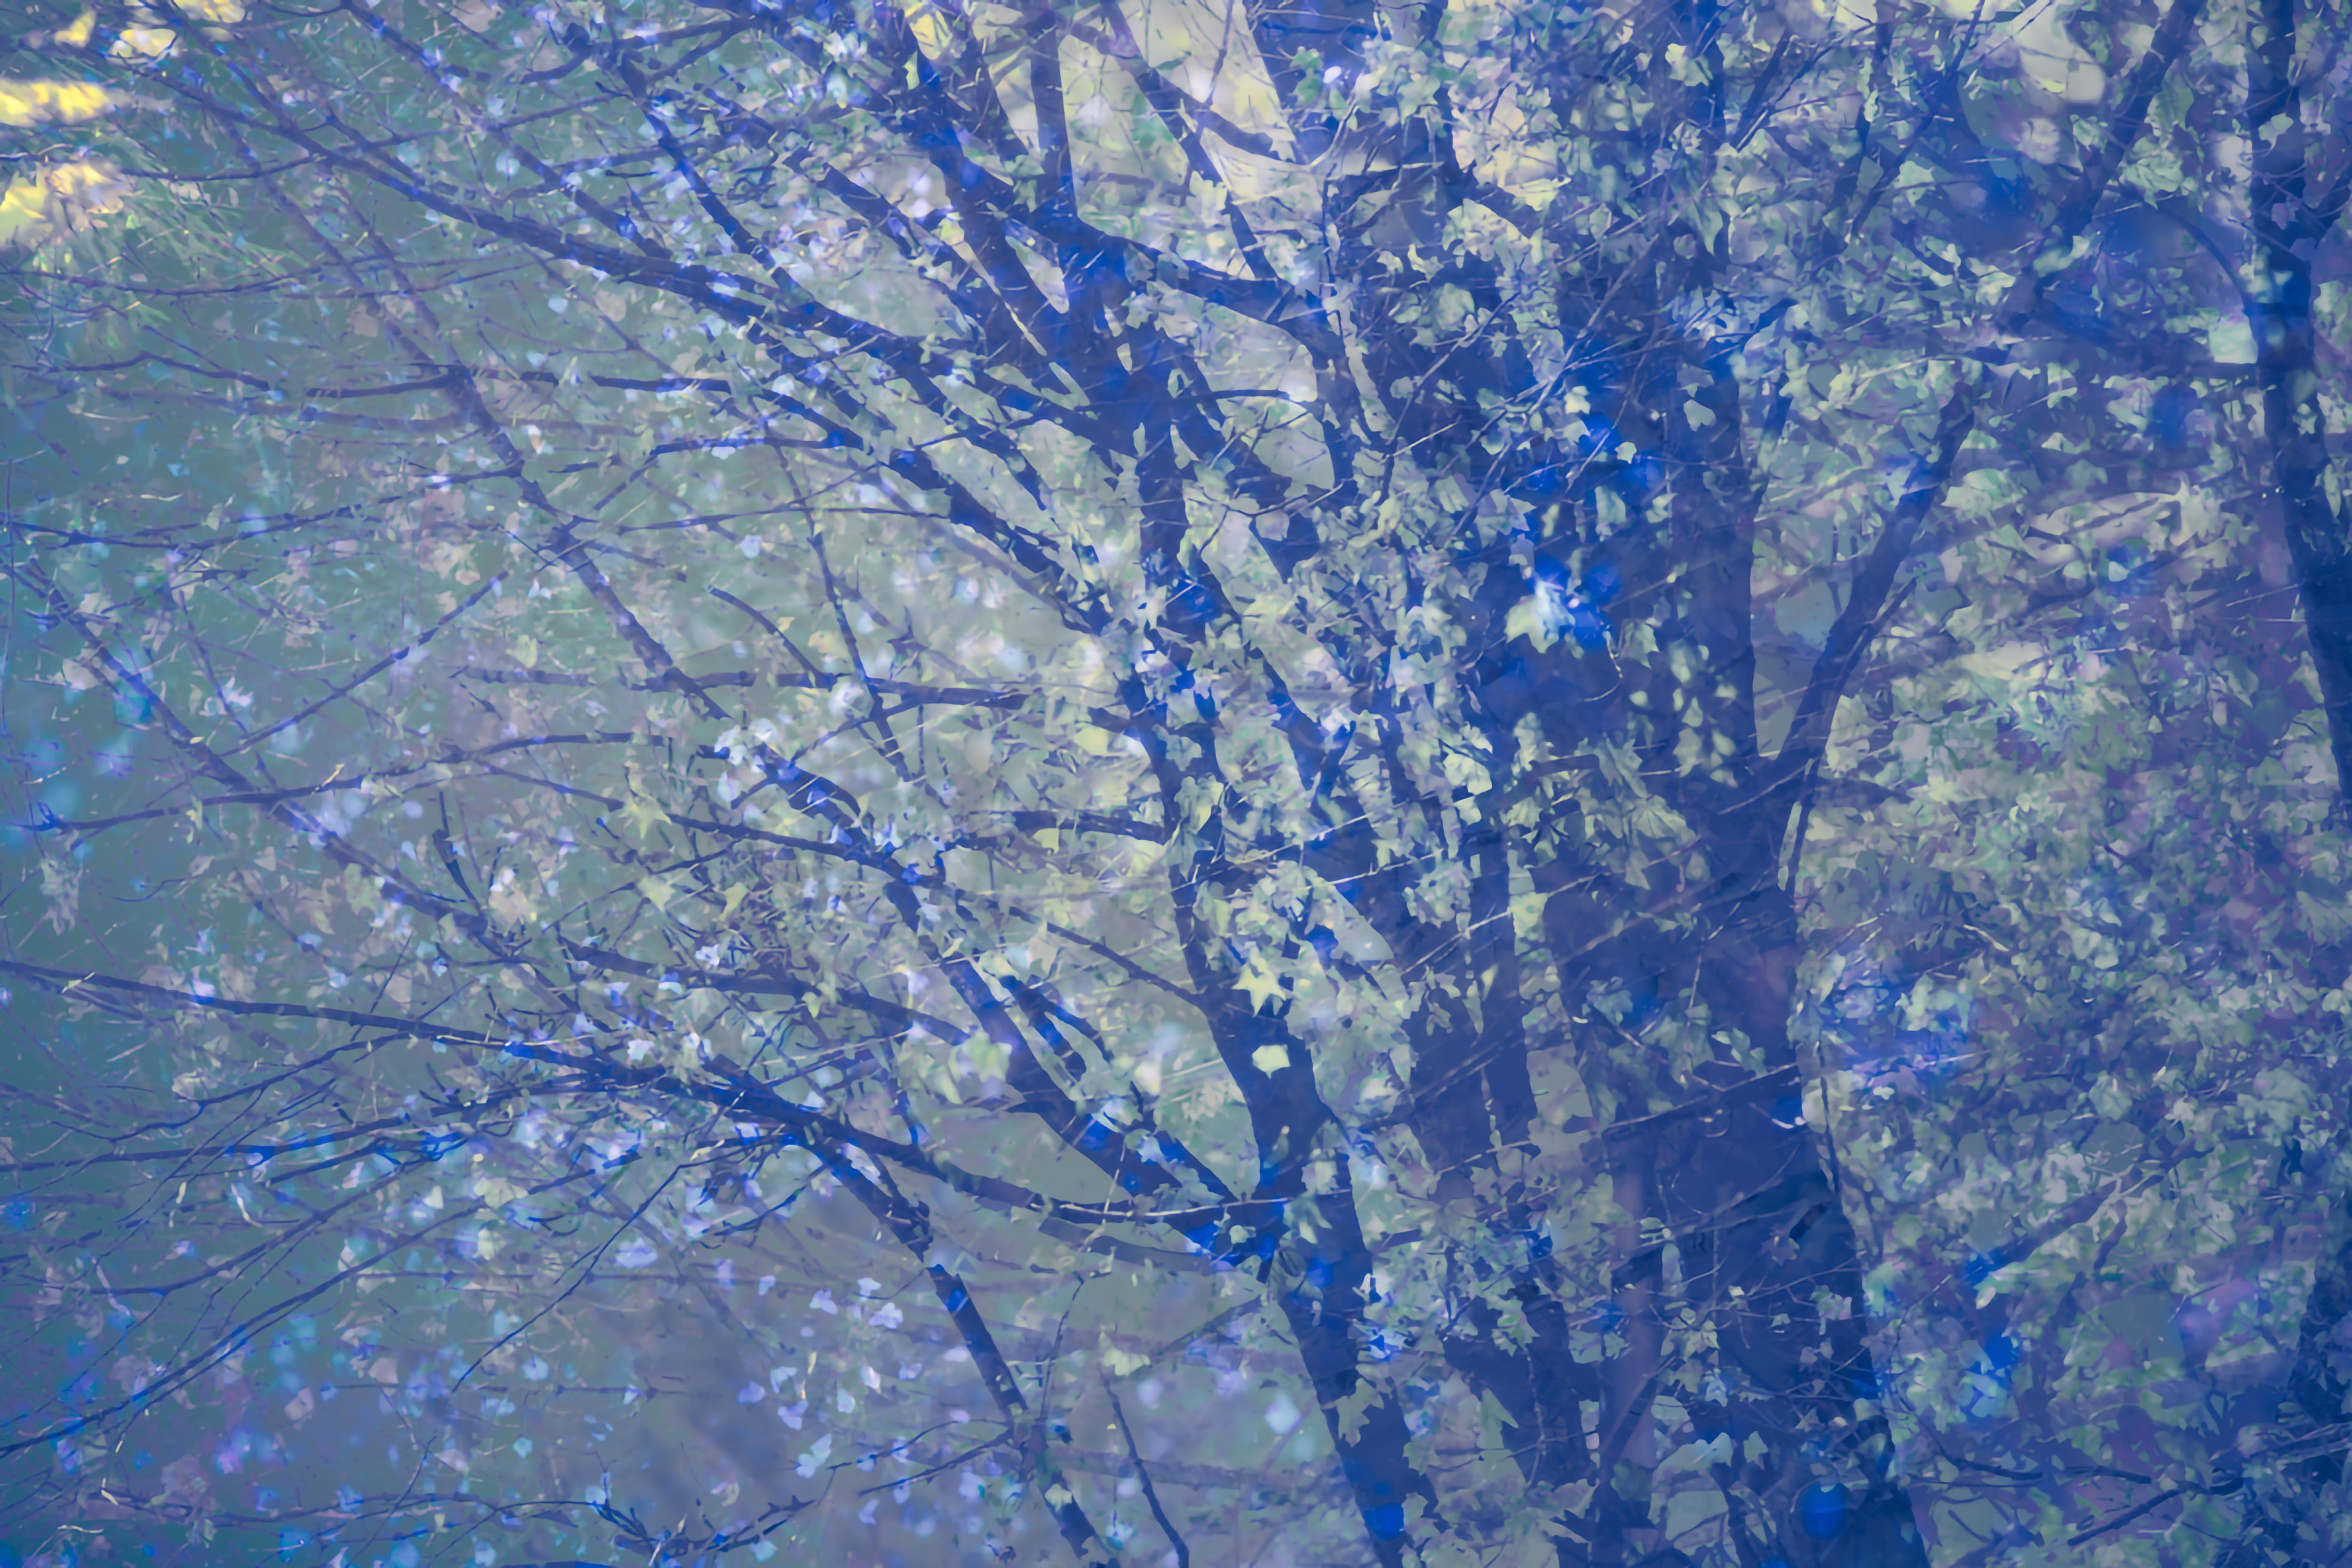 Tori Gagne Abstract Photograph - "Blue" Abstract Nature Photograph, 38" x 57"